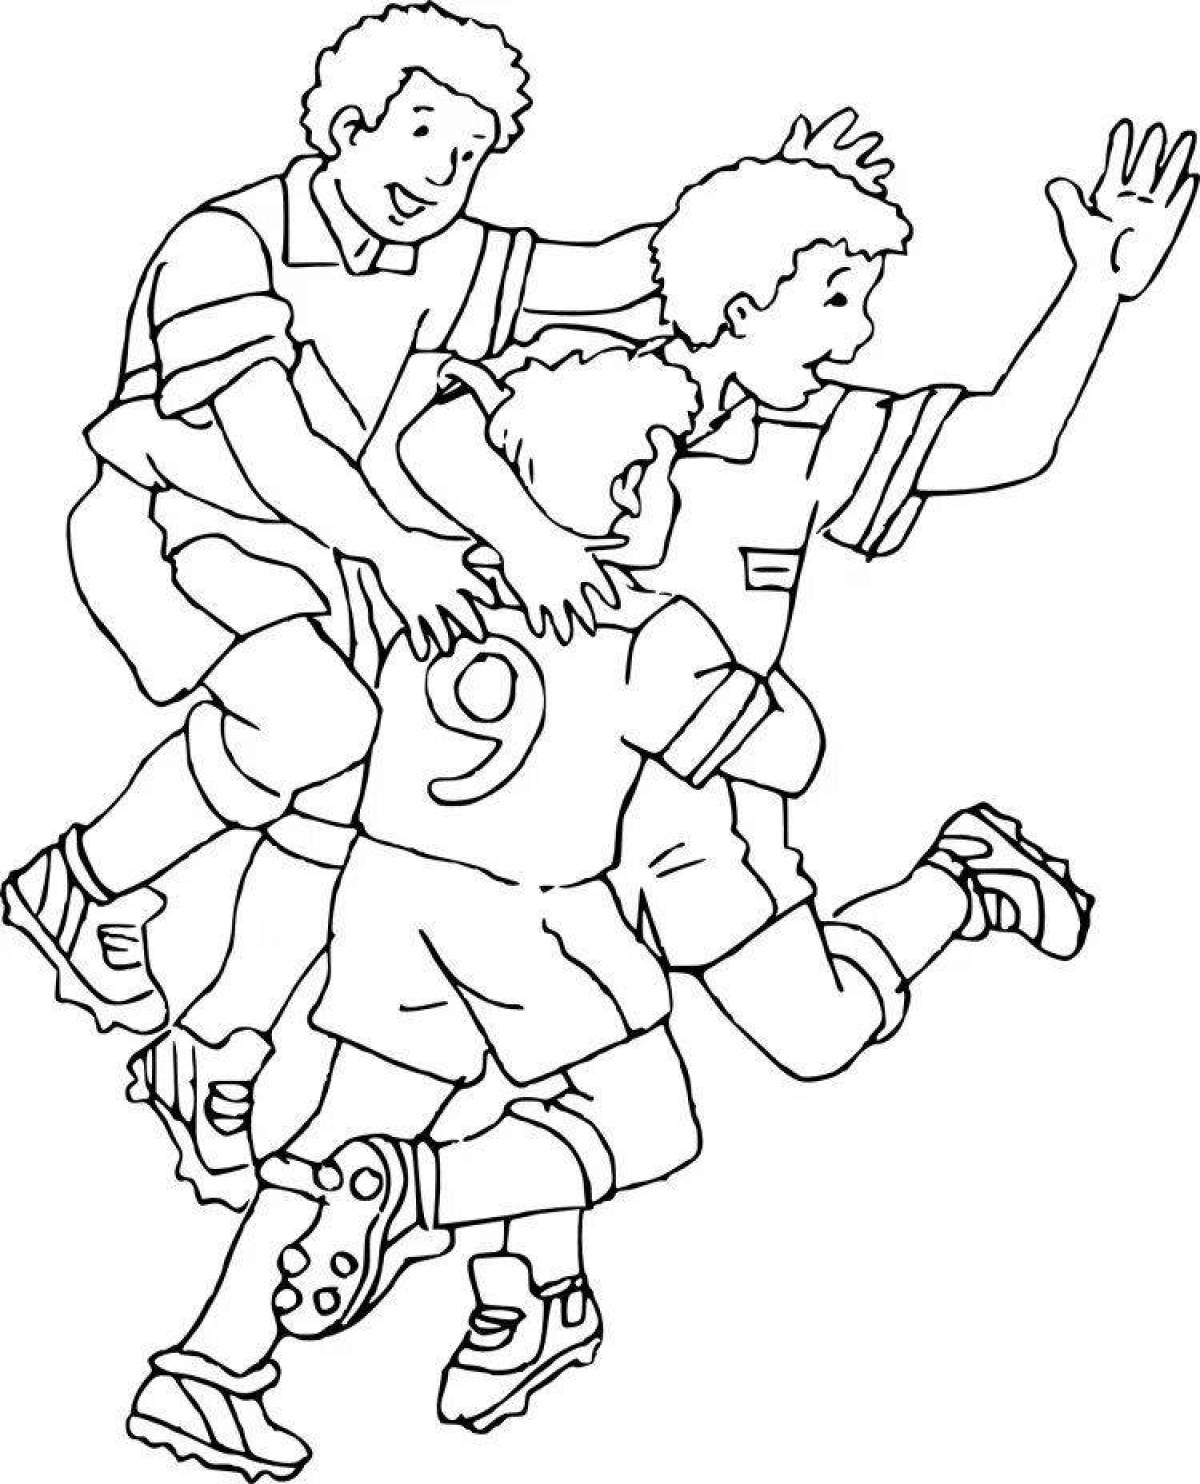 Color fun coloring page player